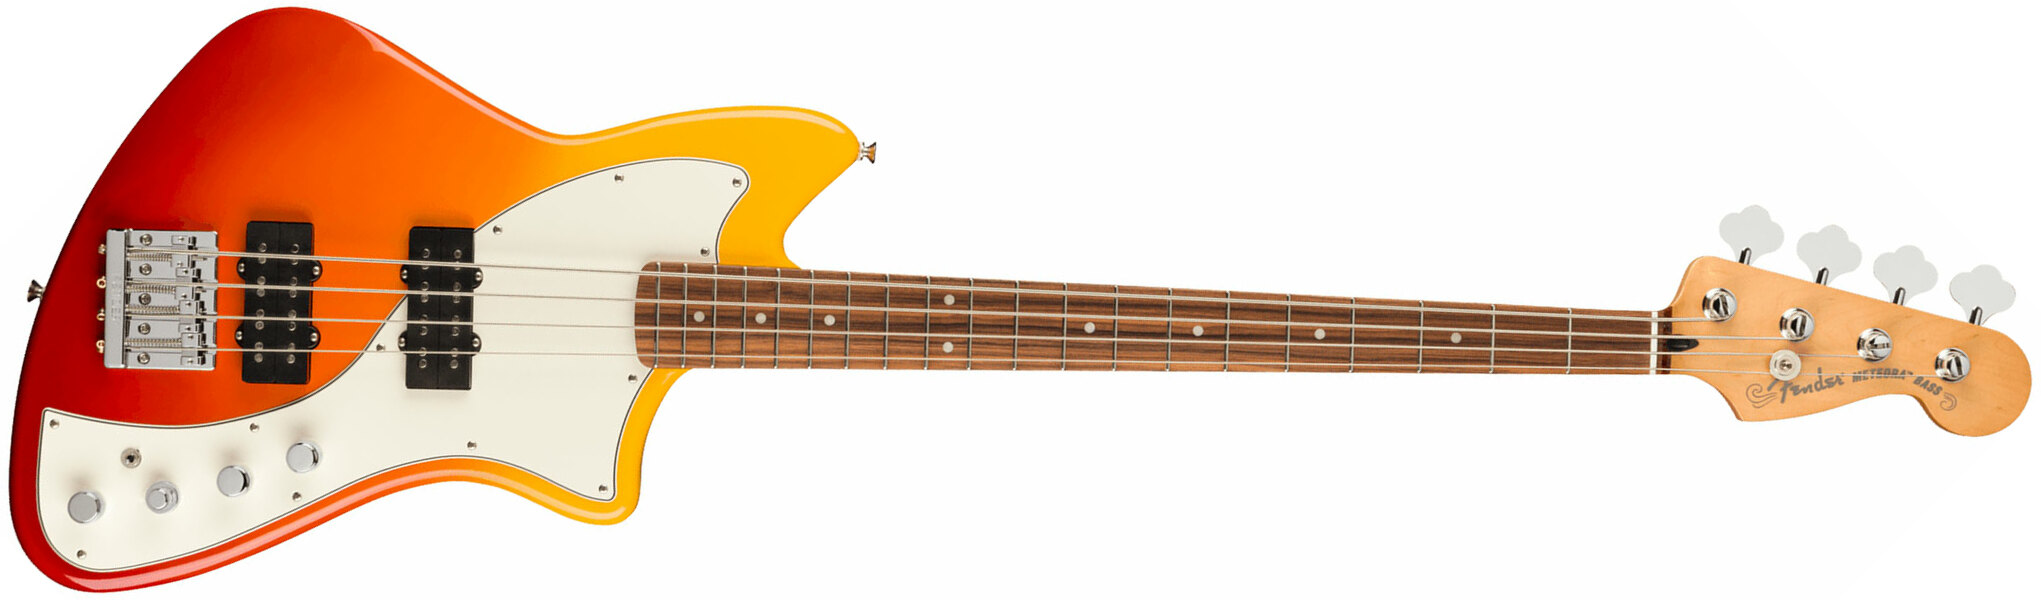 Fender Meteora Bass Active Player Plus Mex Pf - Tequila Sunrise - Solid body electric bass - Main picture